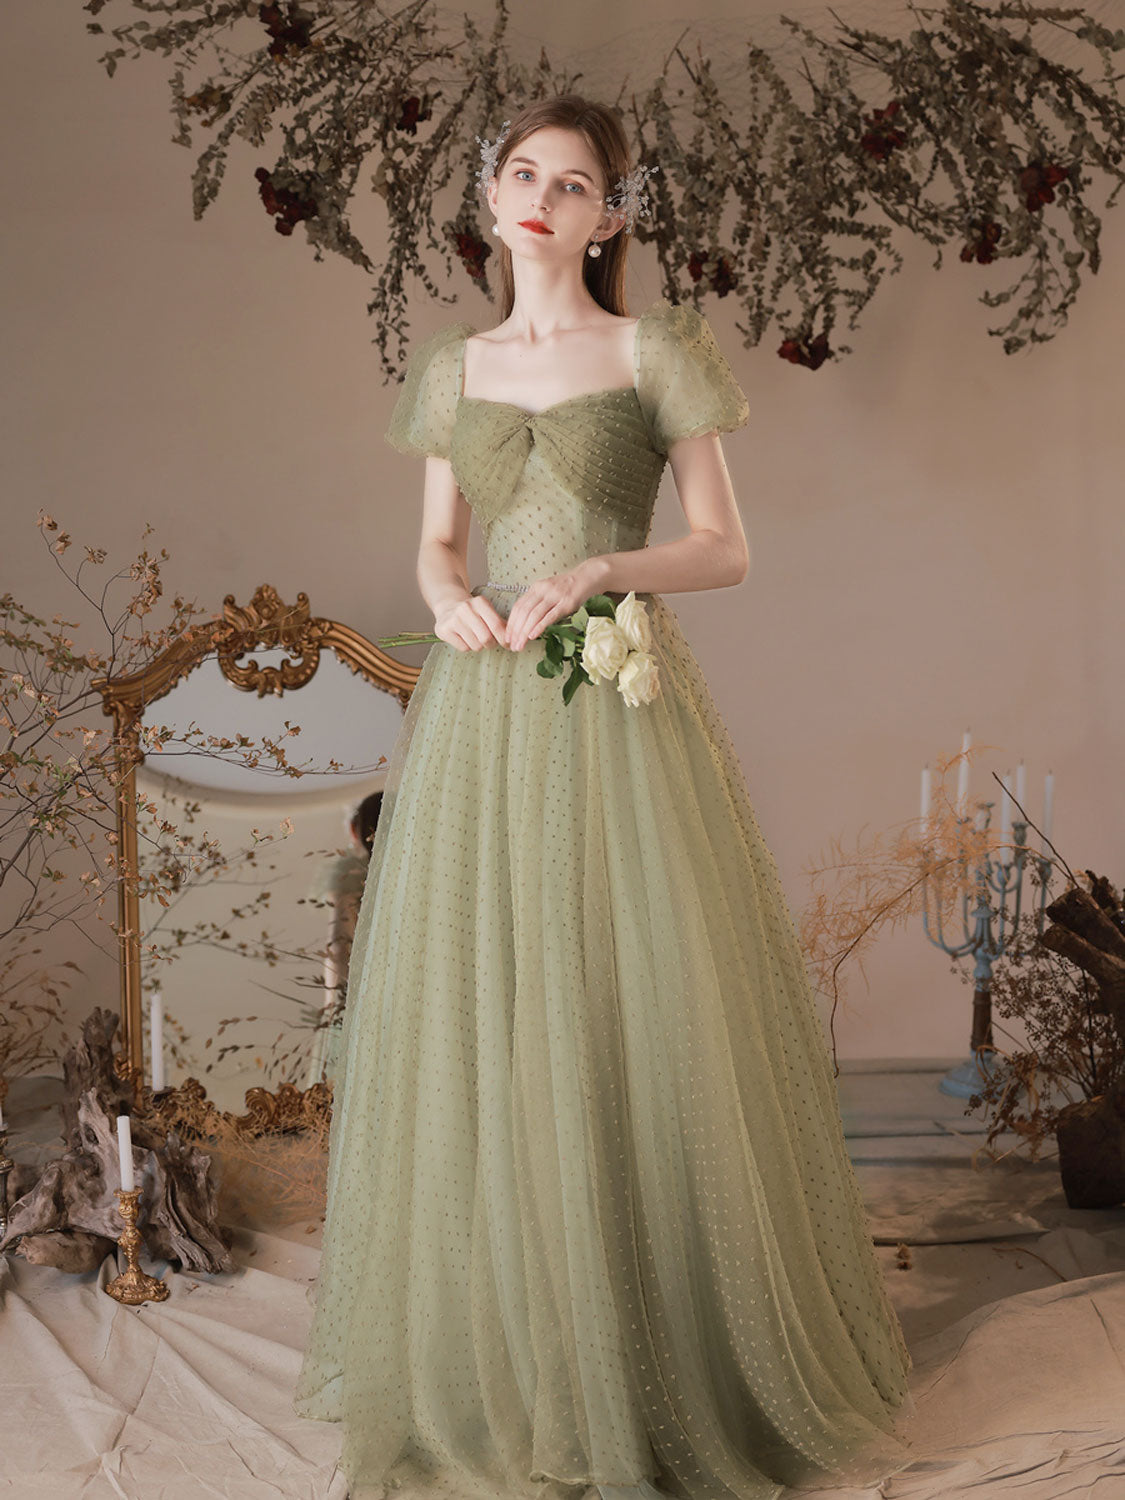 Sage Green Tulle Long Square Neck Illusion Prom Dress - DollyGown